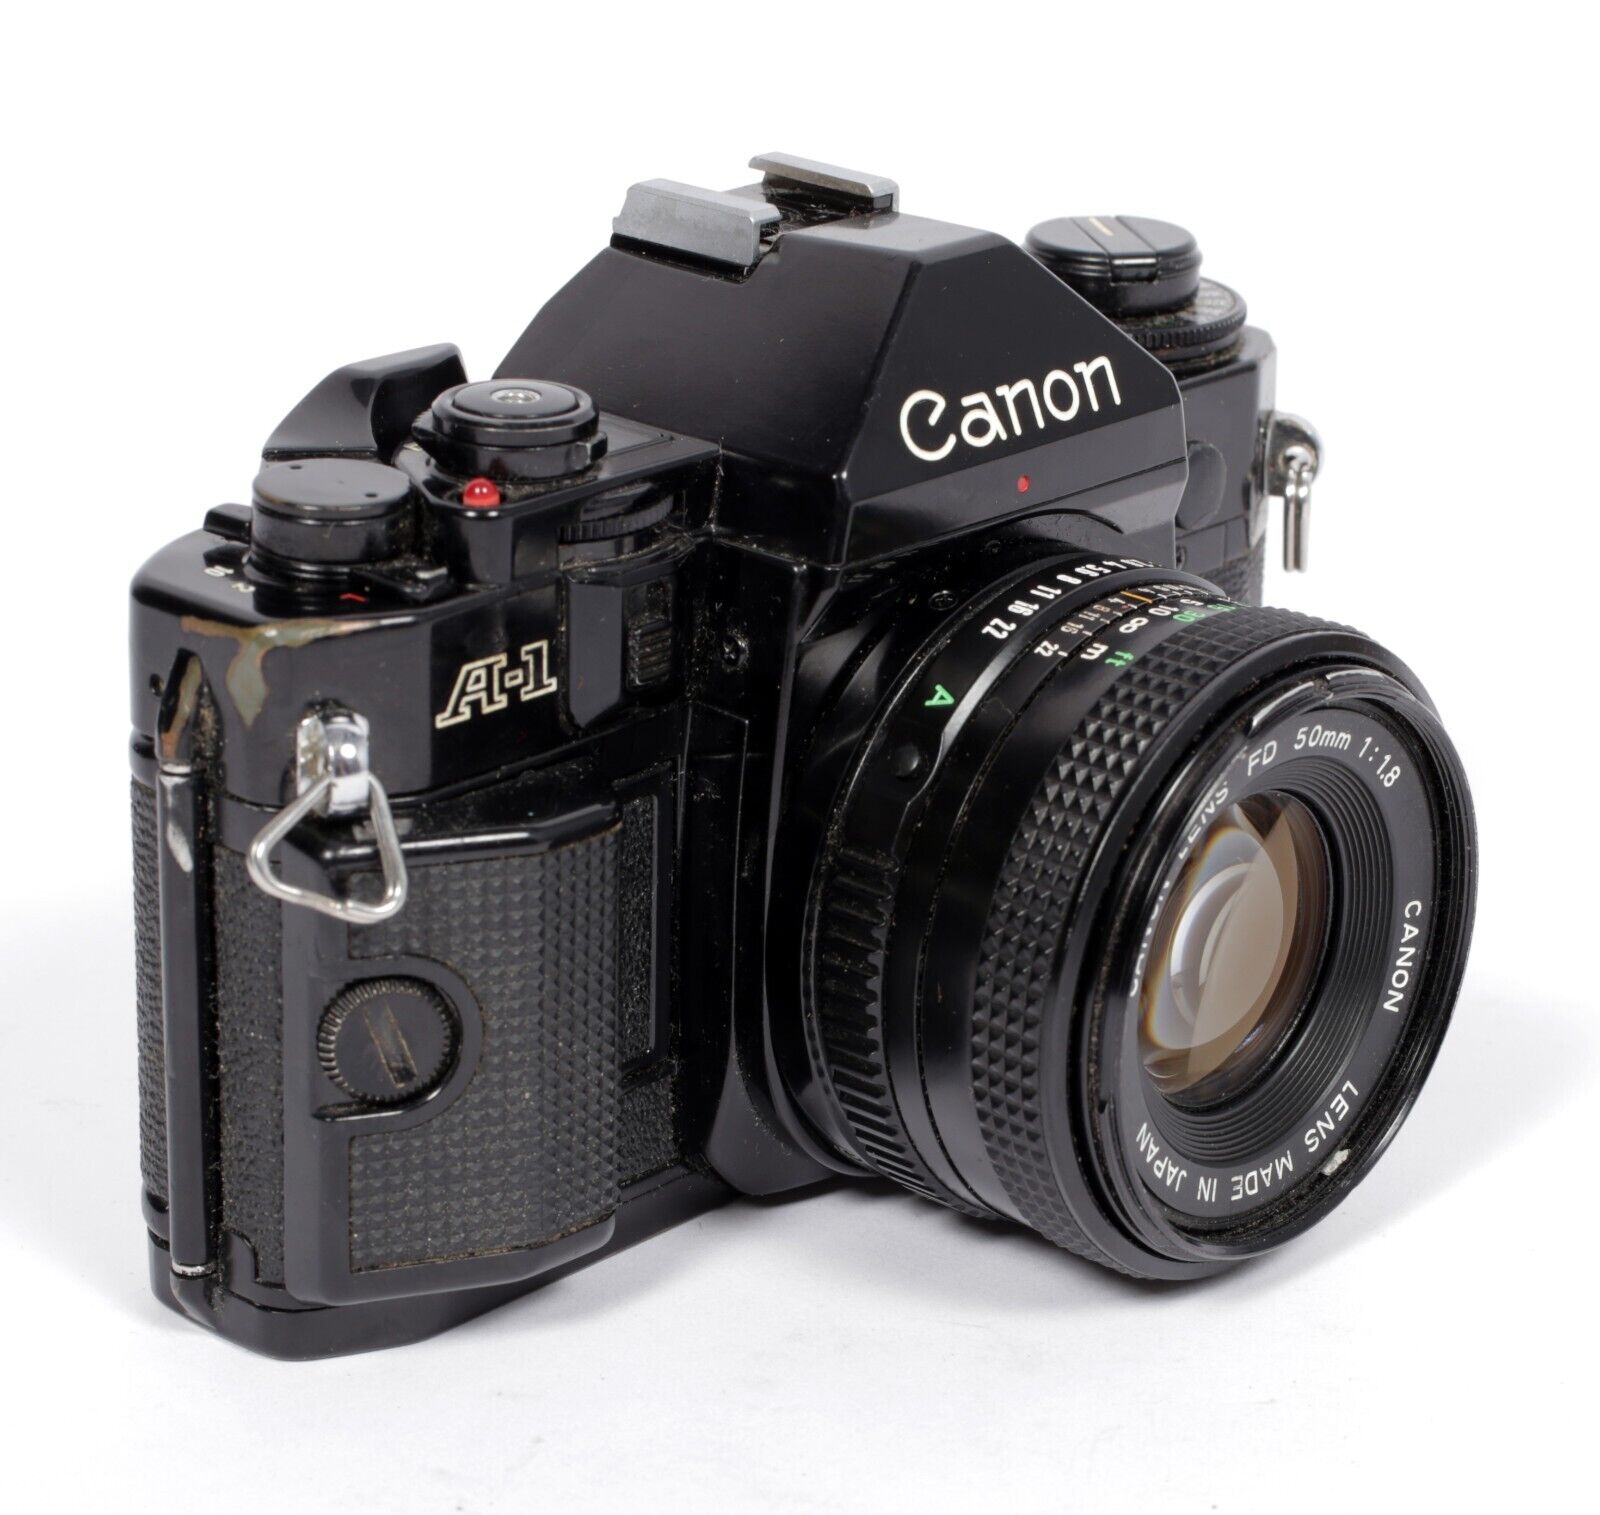 Canon A-1 35mm SLR Film Camera with 50mm F1.8 FDn lens #553 CatLABS